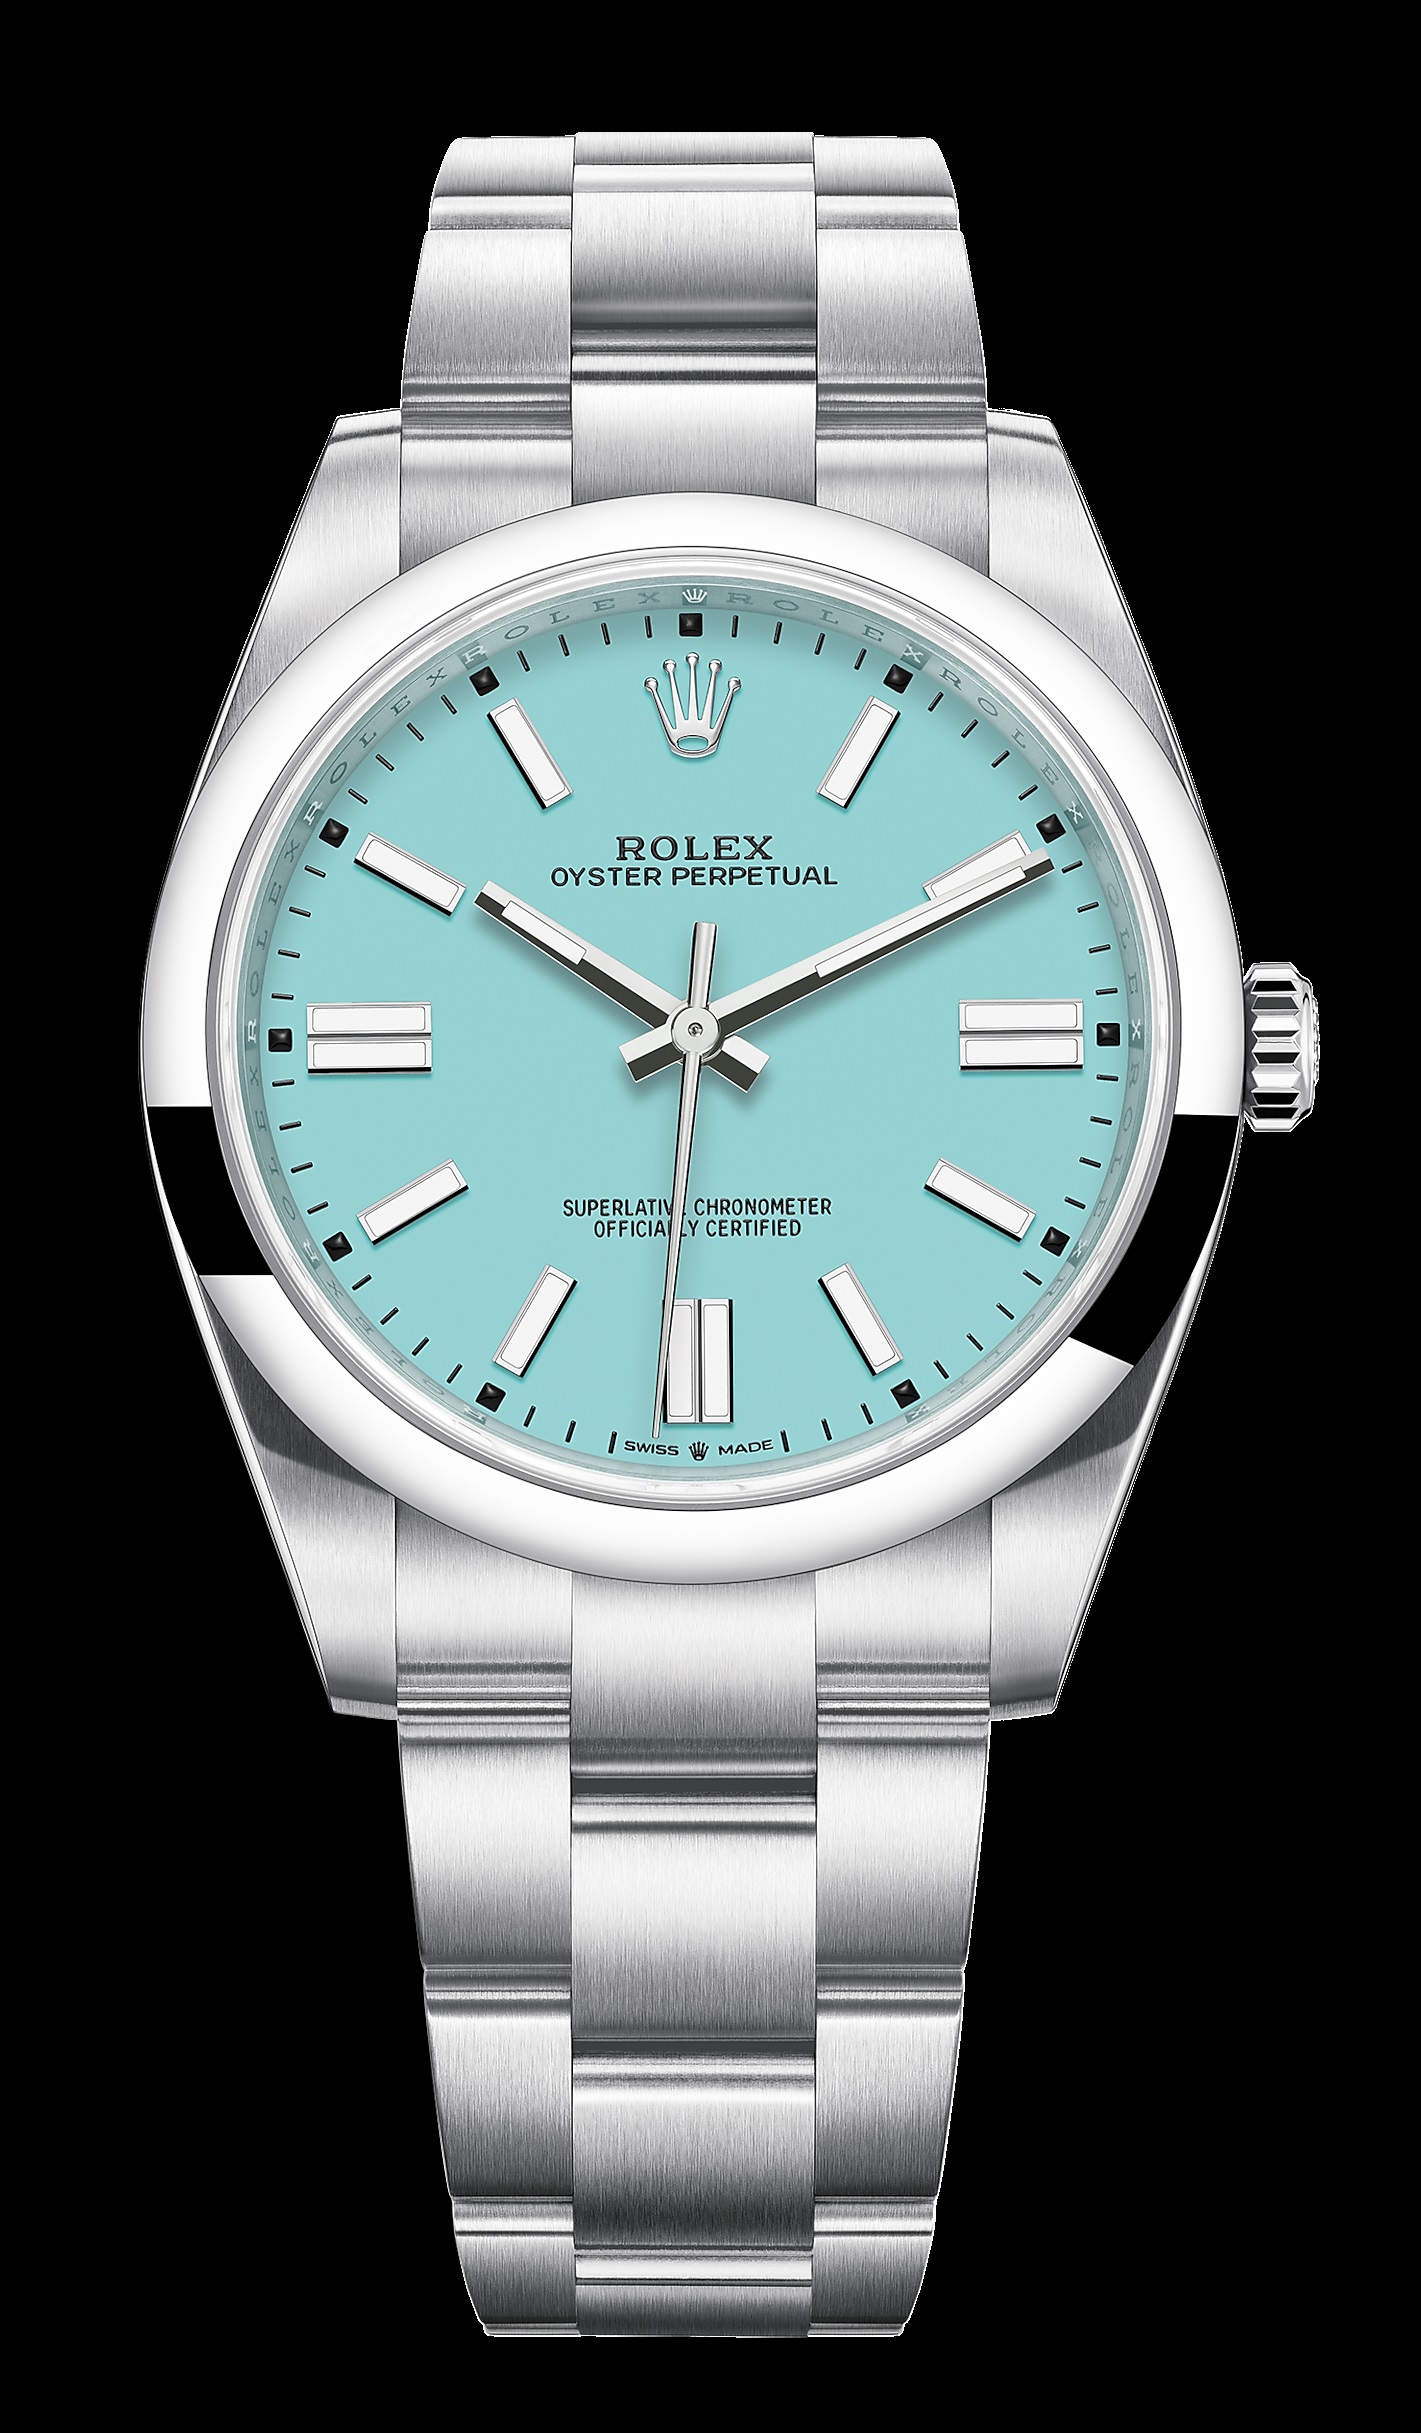 Rolex-Oyster-Perpetual-41-124300-watch-turquoise-blue.jpg